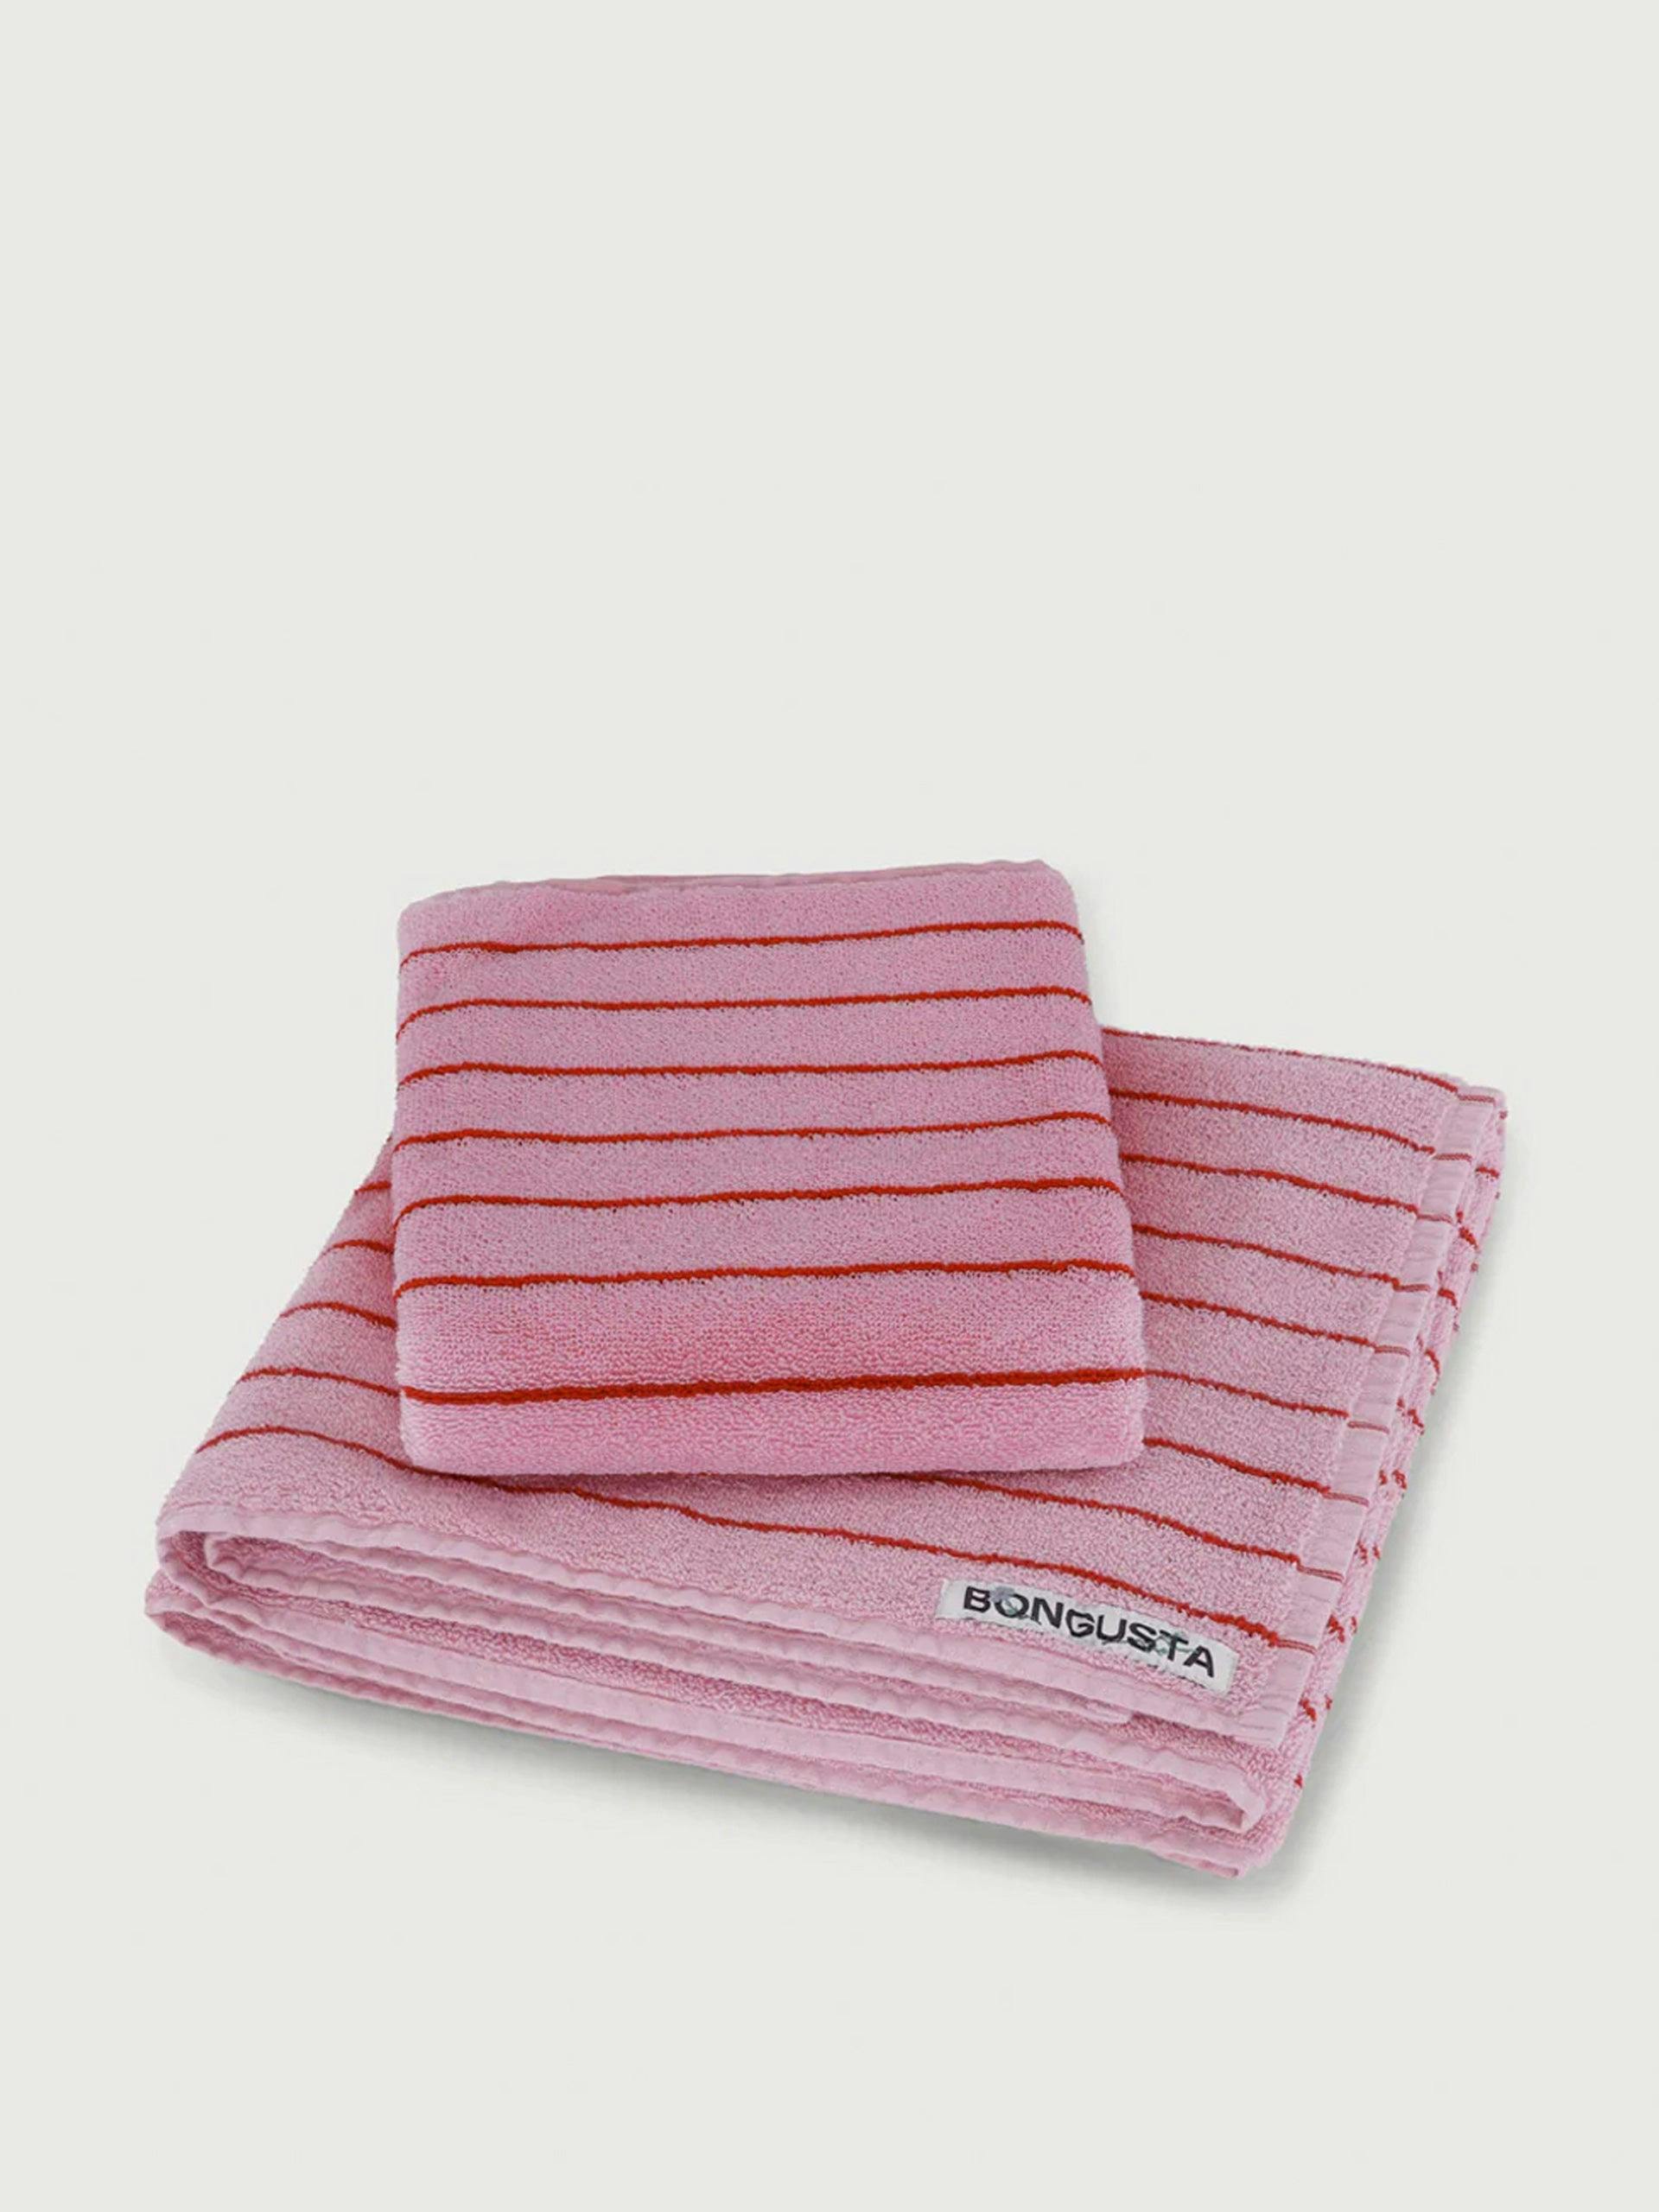 Naram towels in pink and red